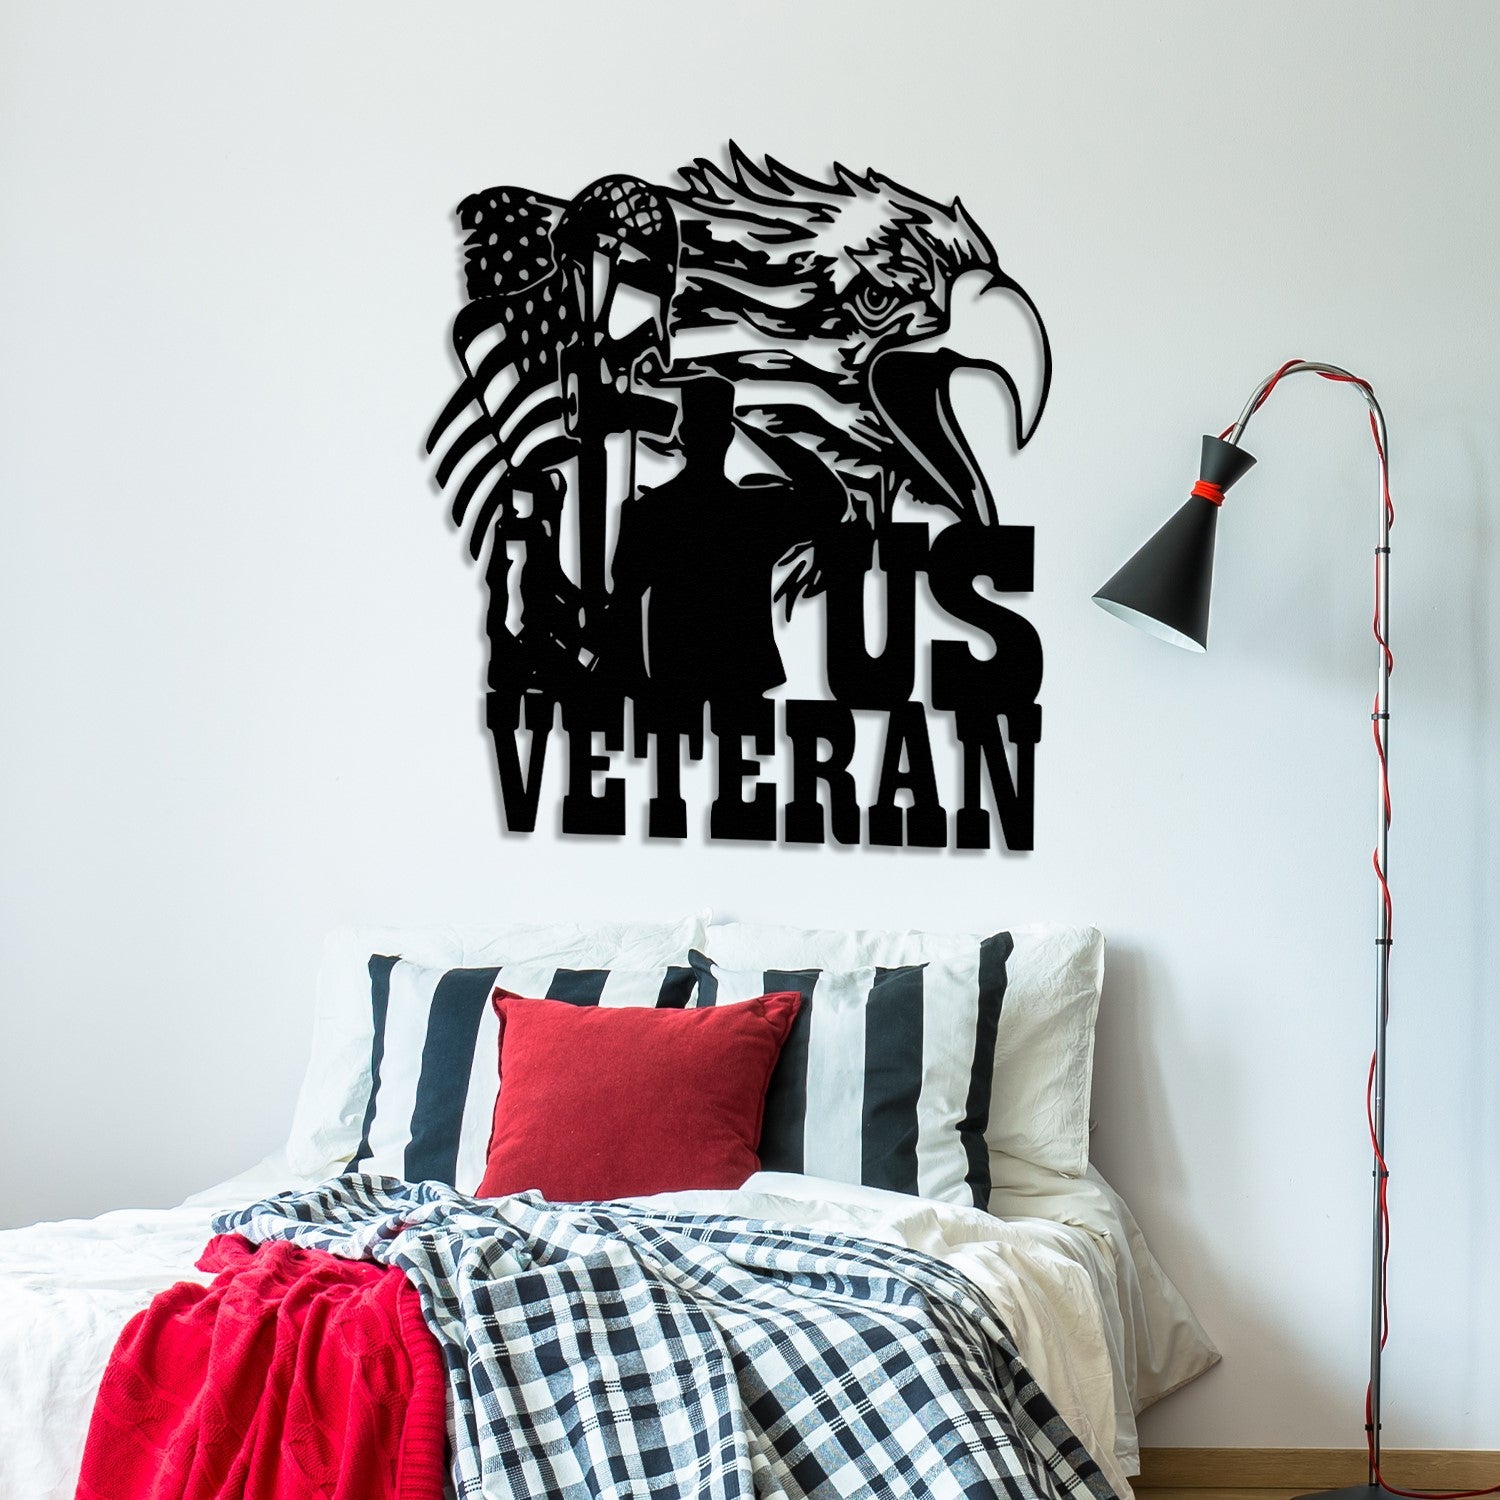 Home Décor for Veterans: This metal wall art featuring a powerful American bald eagle and a weathered American flag is an ideal Independence Day gift for US Veterans. A symbol of national pride and service.